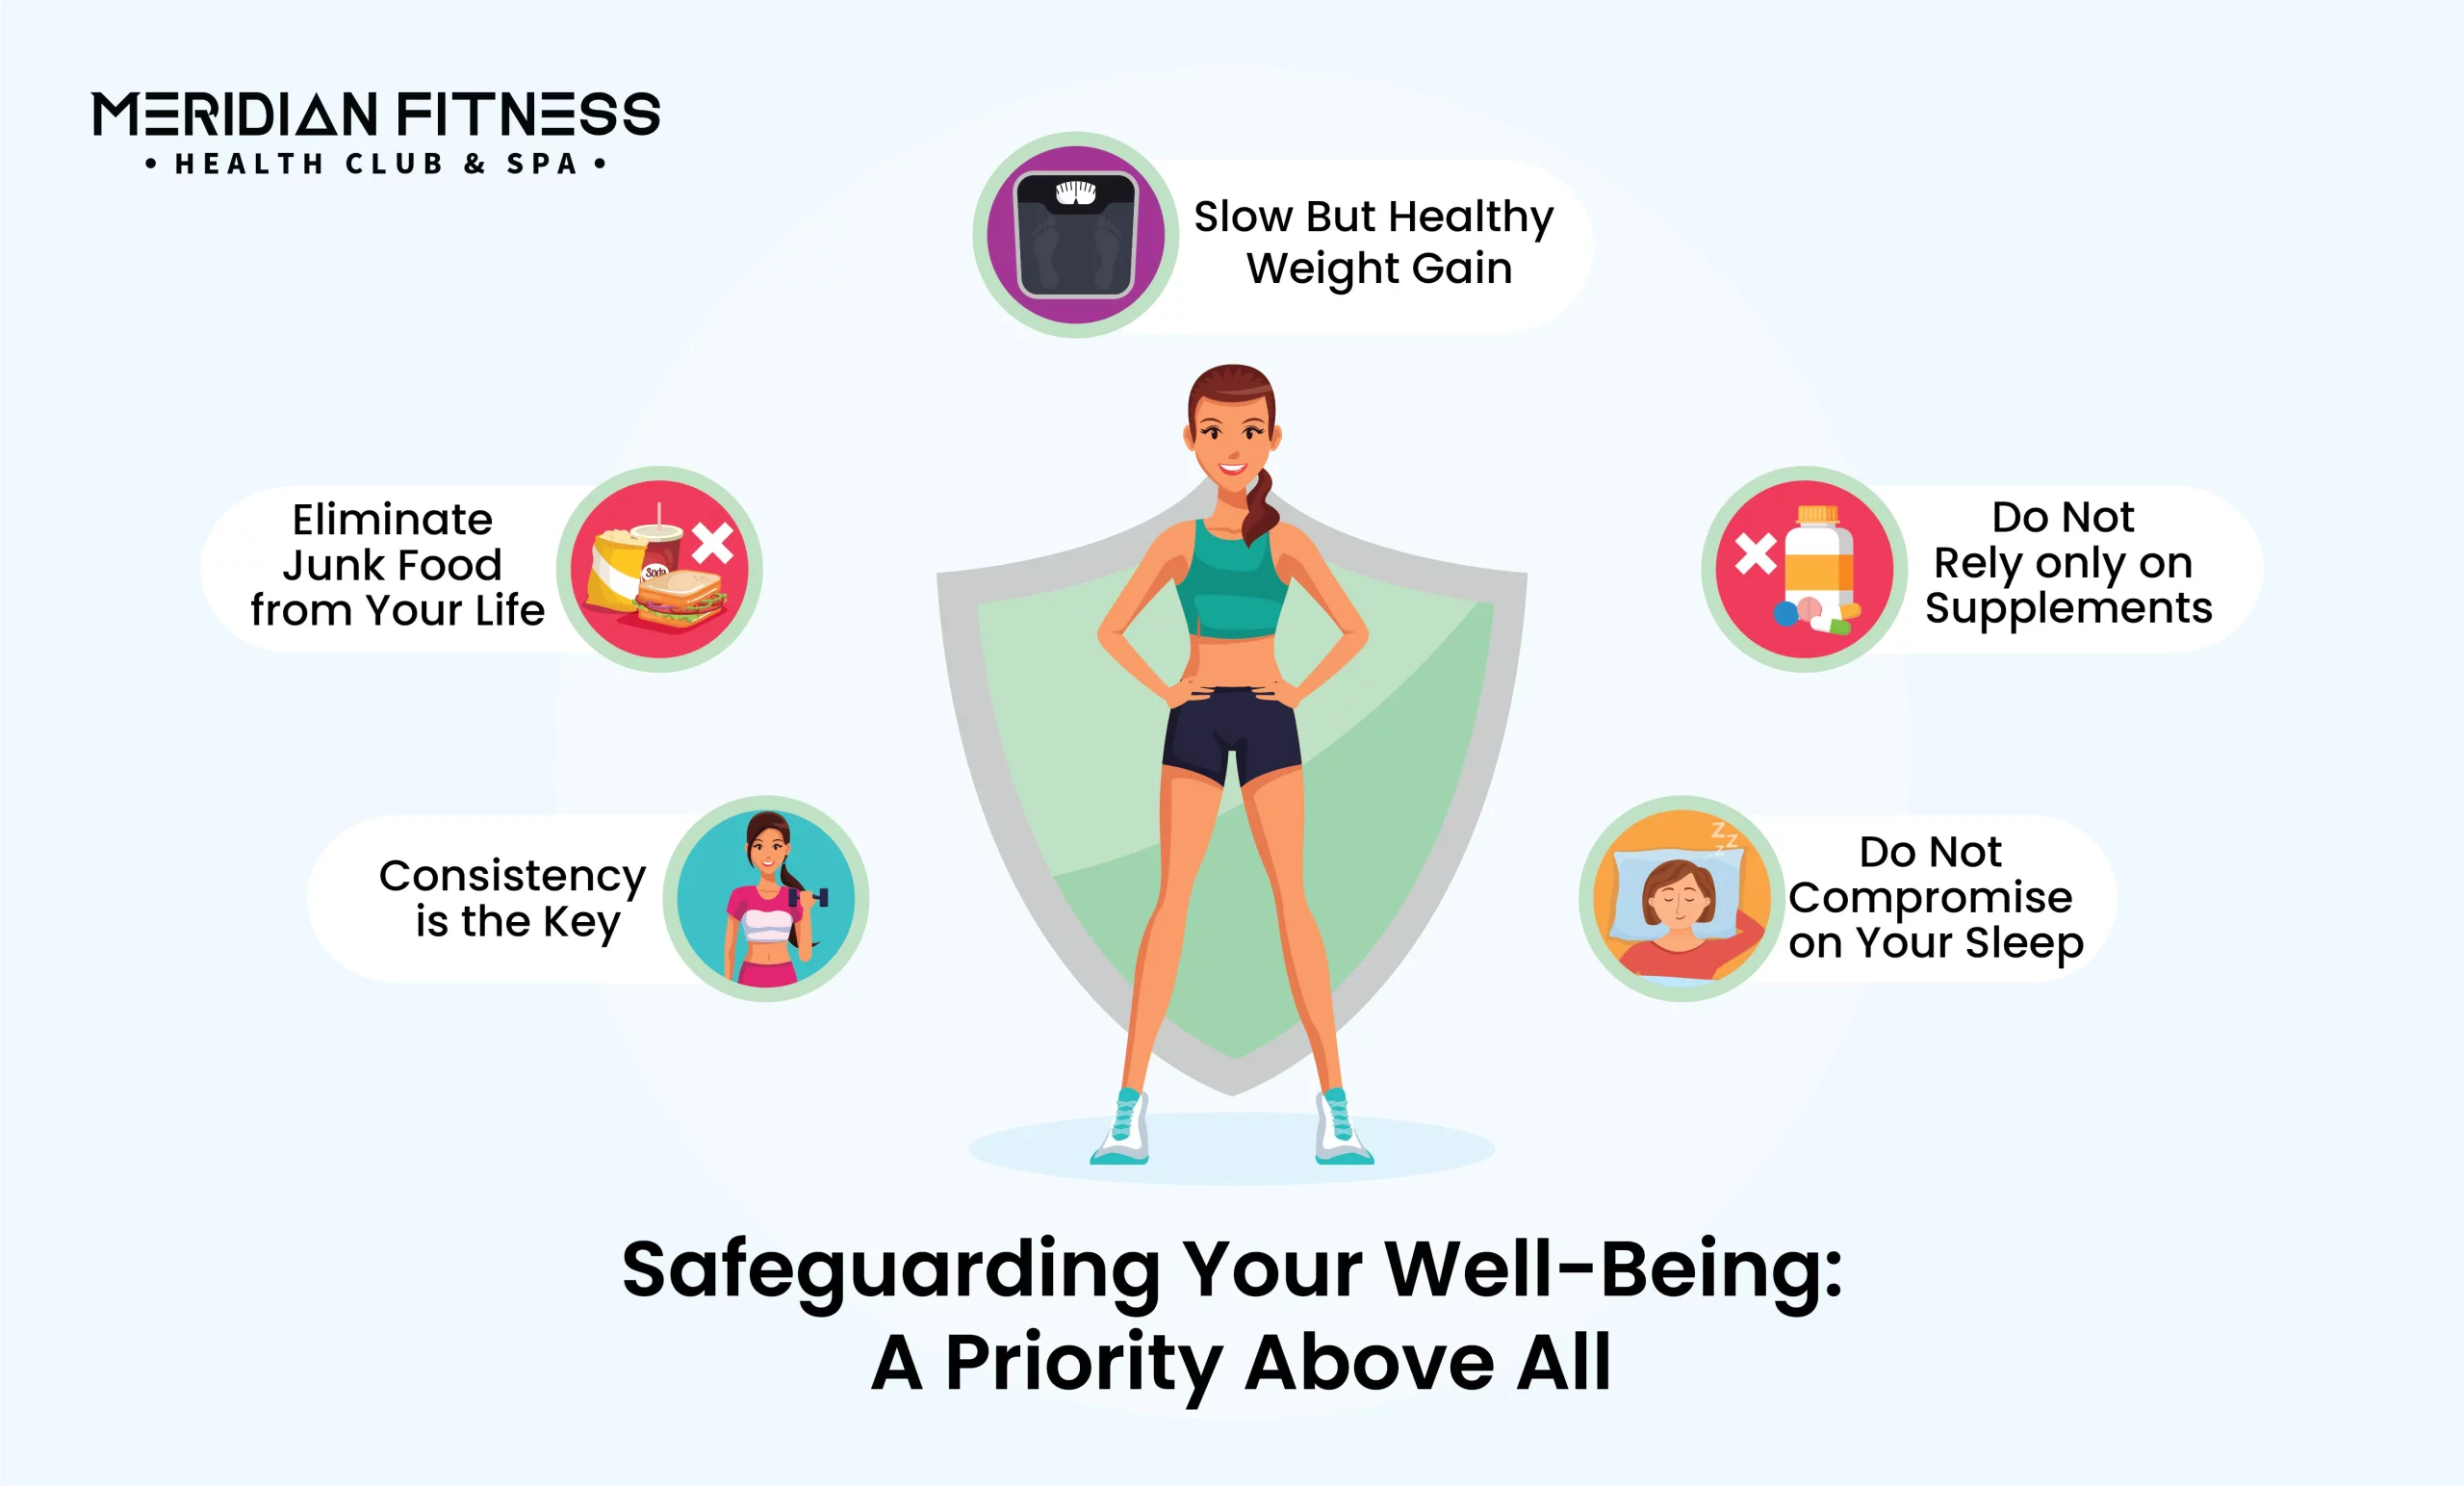 Safeguarding Your Well-Being A Priority Above All